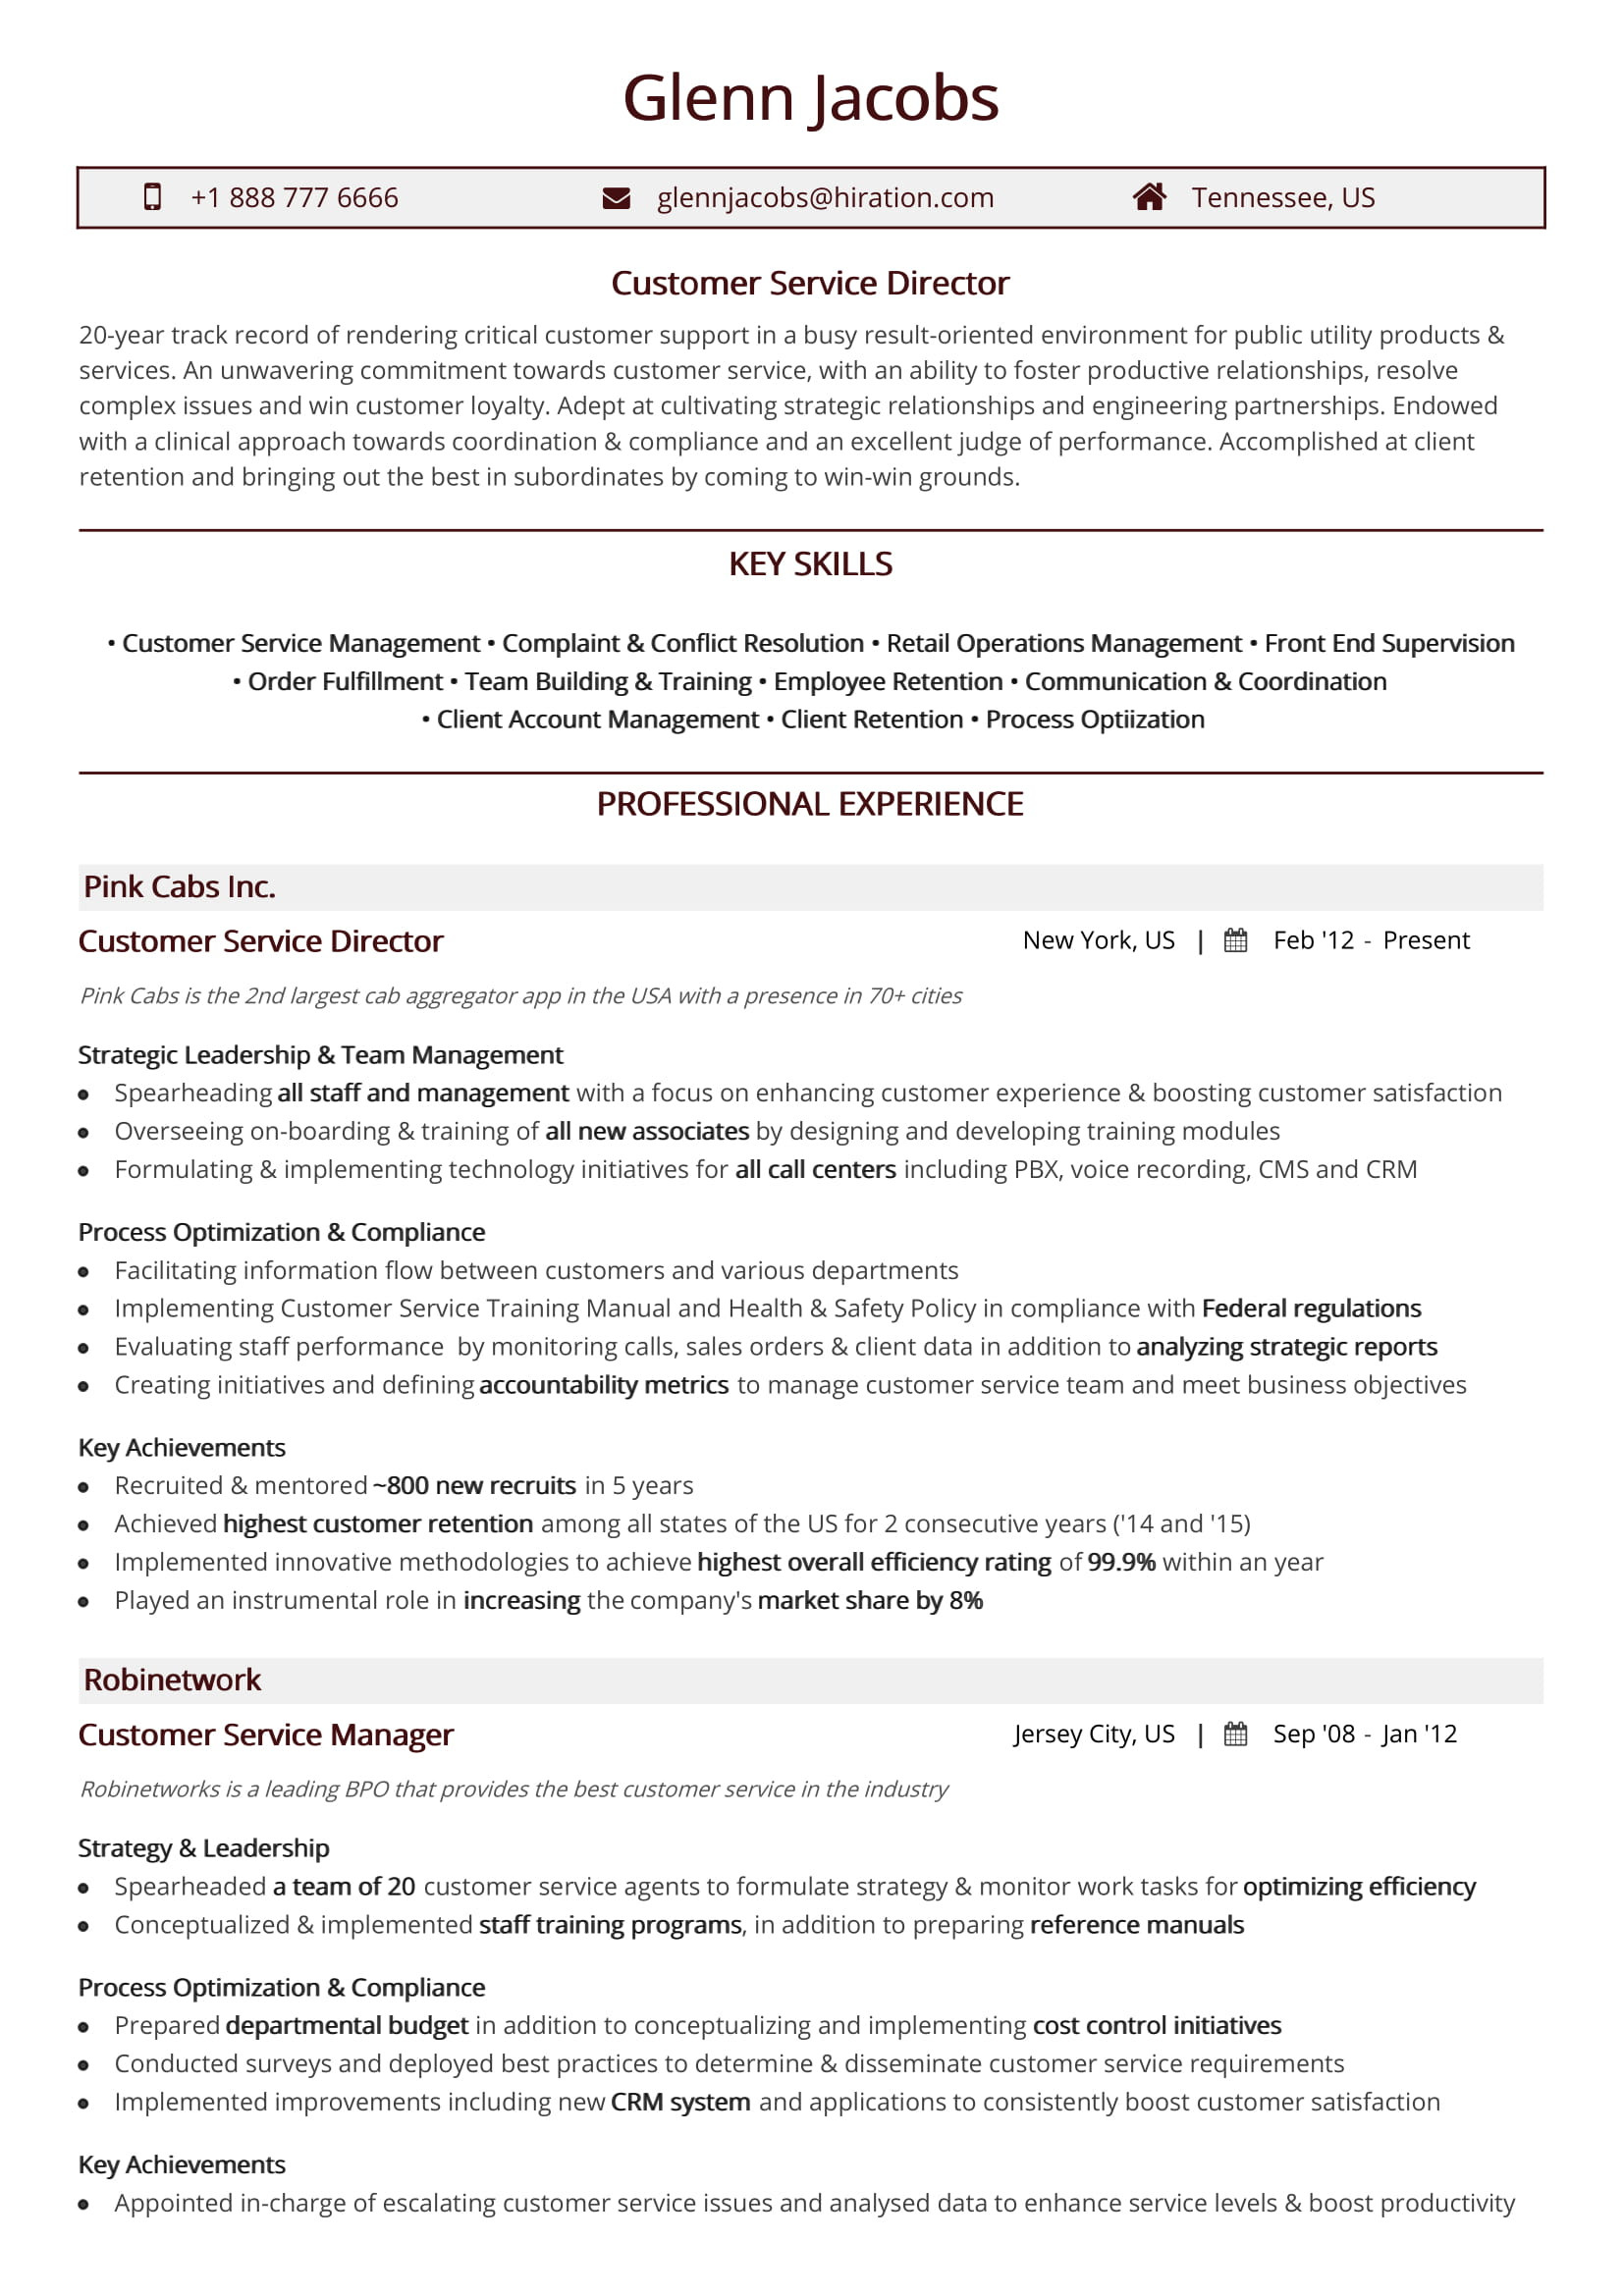 customer service skills for a resumes